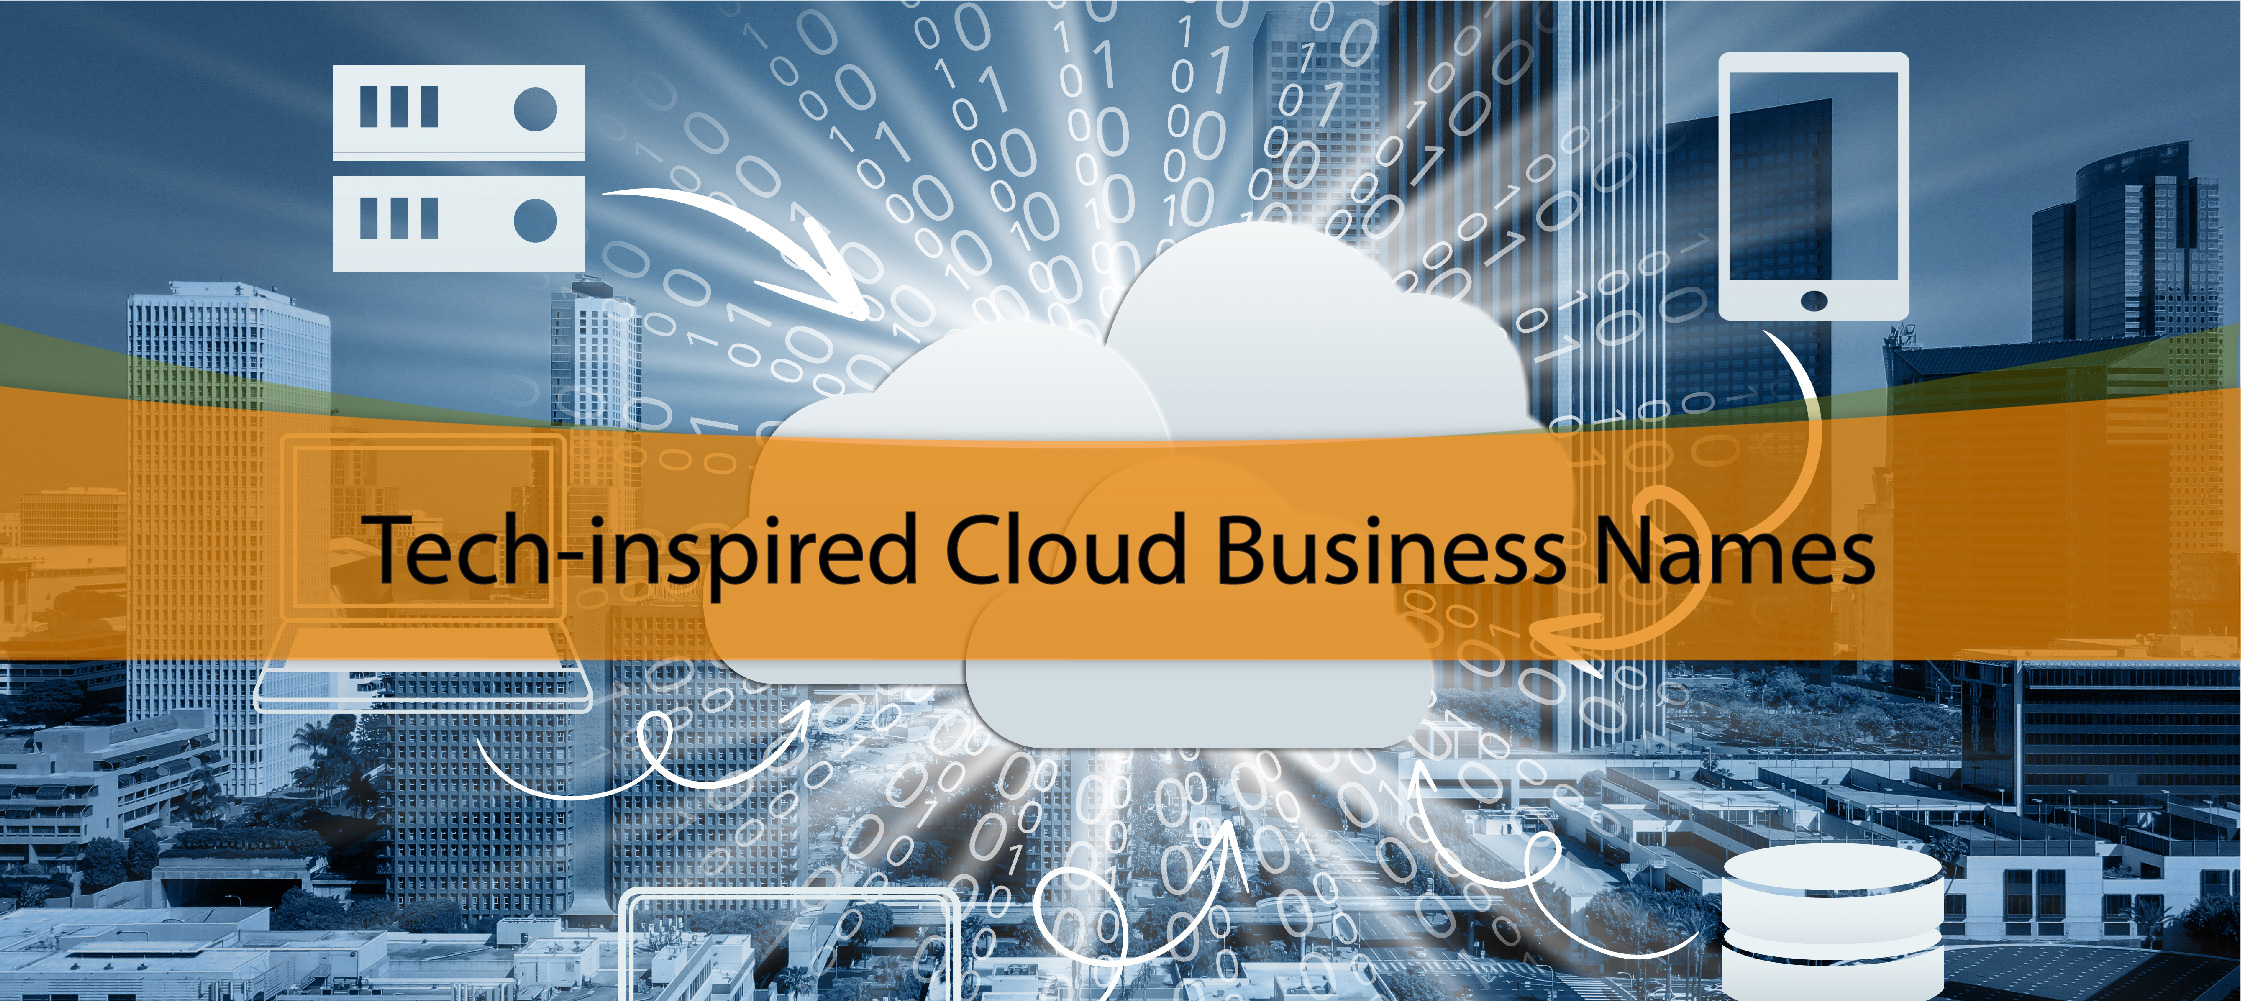 Tech-inspired Cloud Business Names